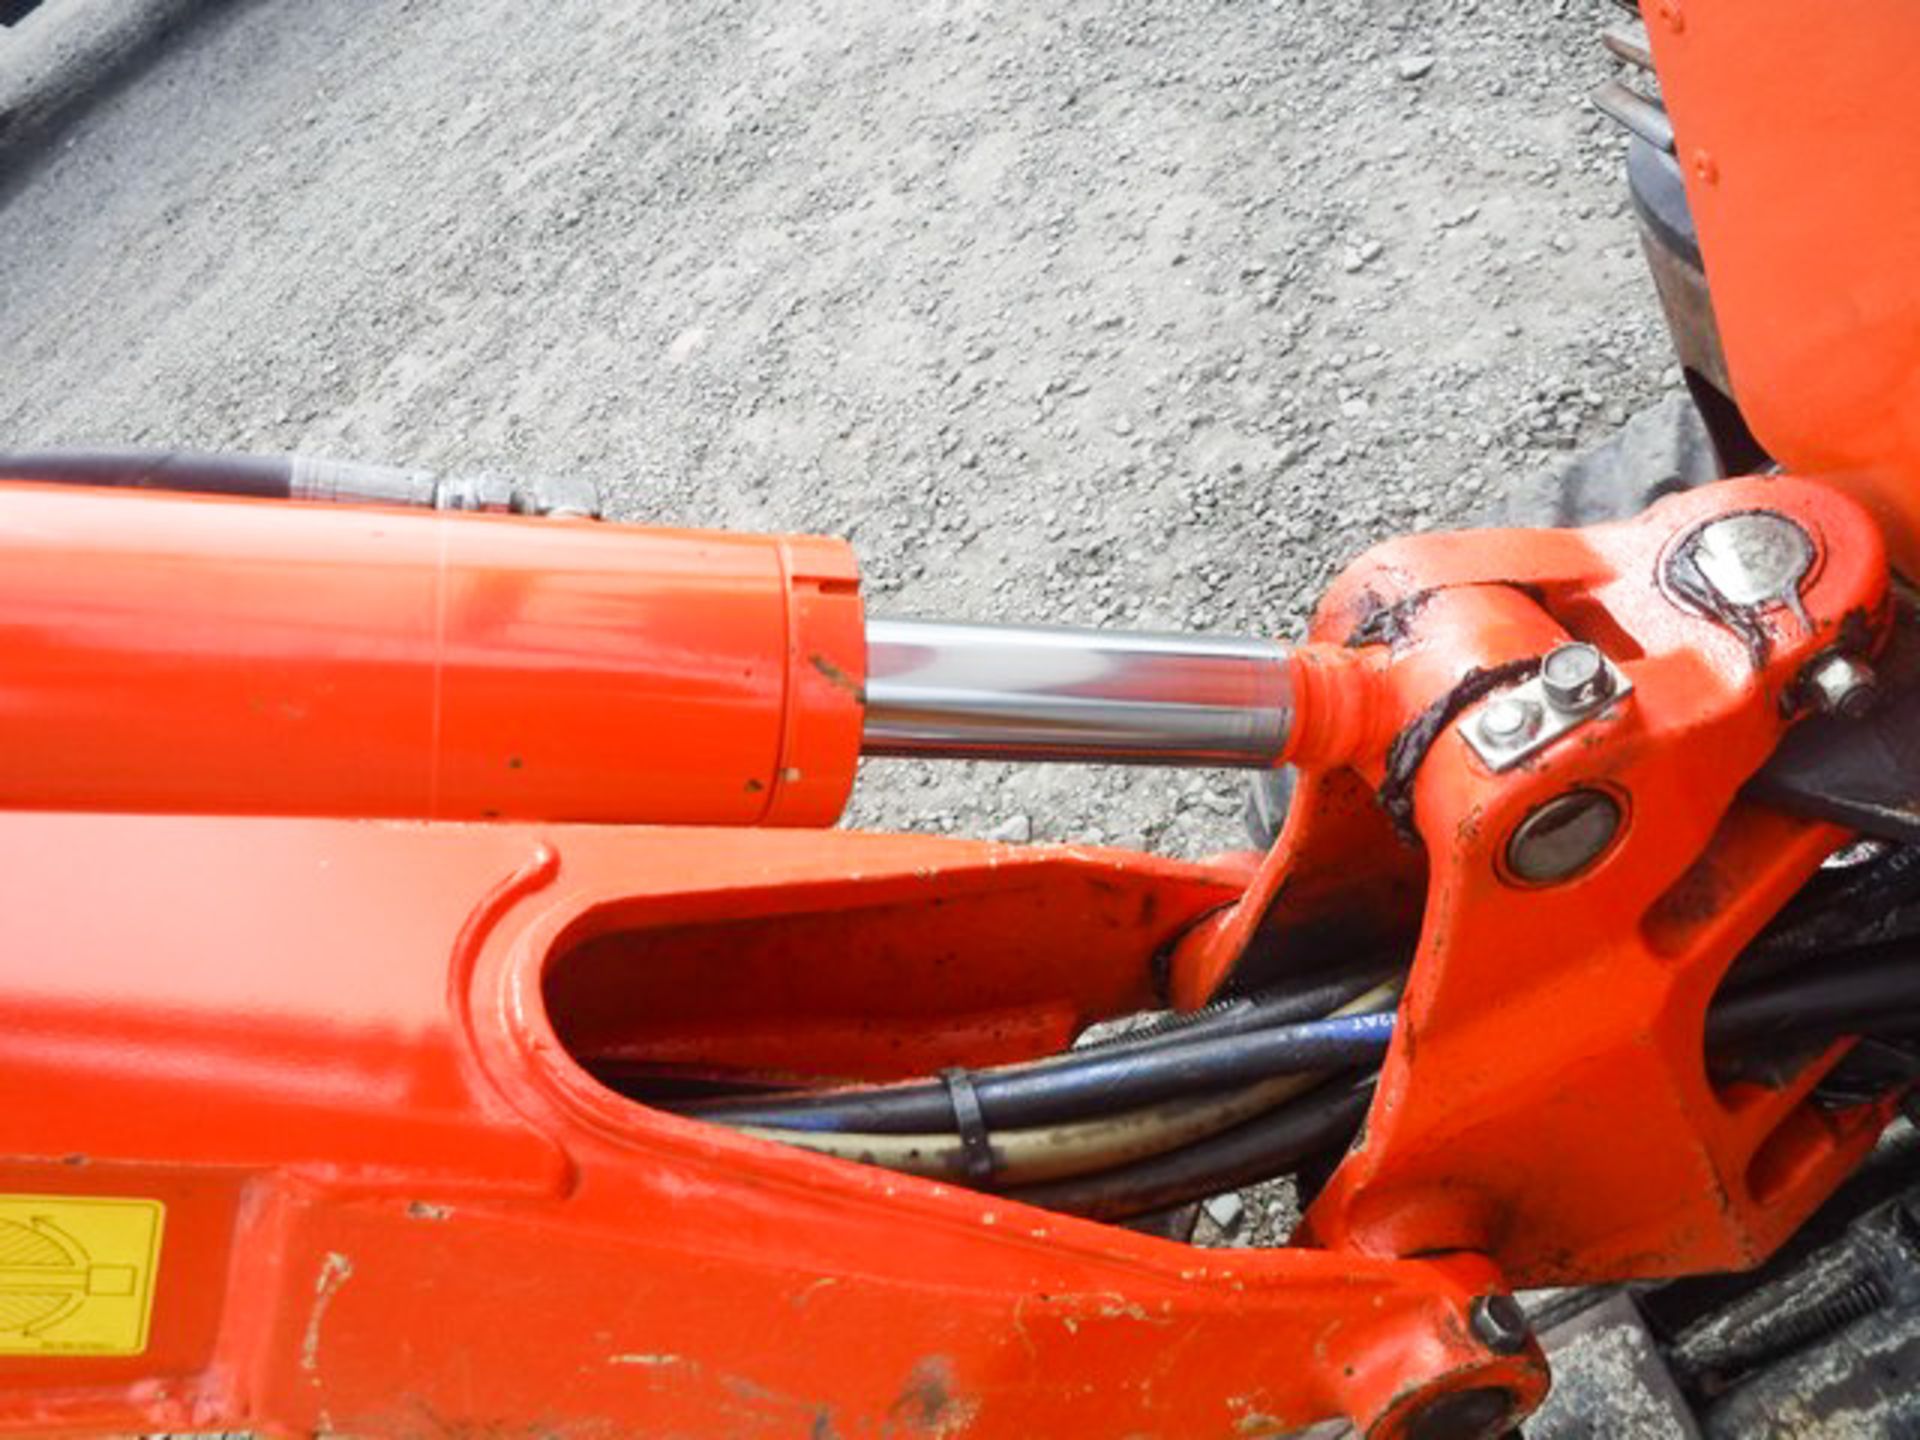 2007 KUBOTA H10-3 MICRO DIGGER, 2622HRS (NOT VERIFIED), 1 BUCKET, 1 TON C/W EXTENDING UNDERCARRIAGE - Image 10 of 19